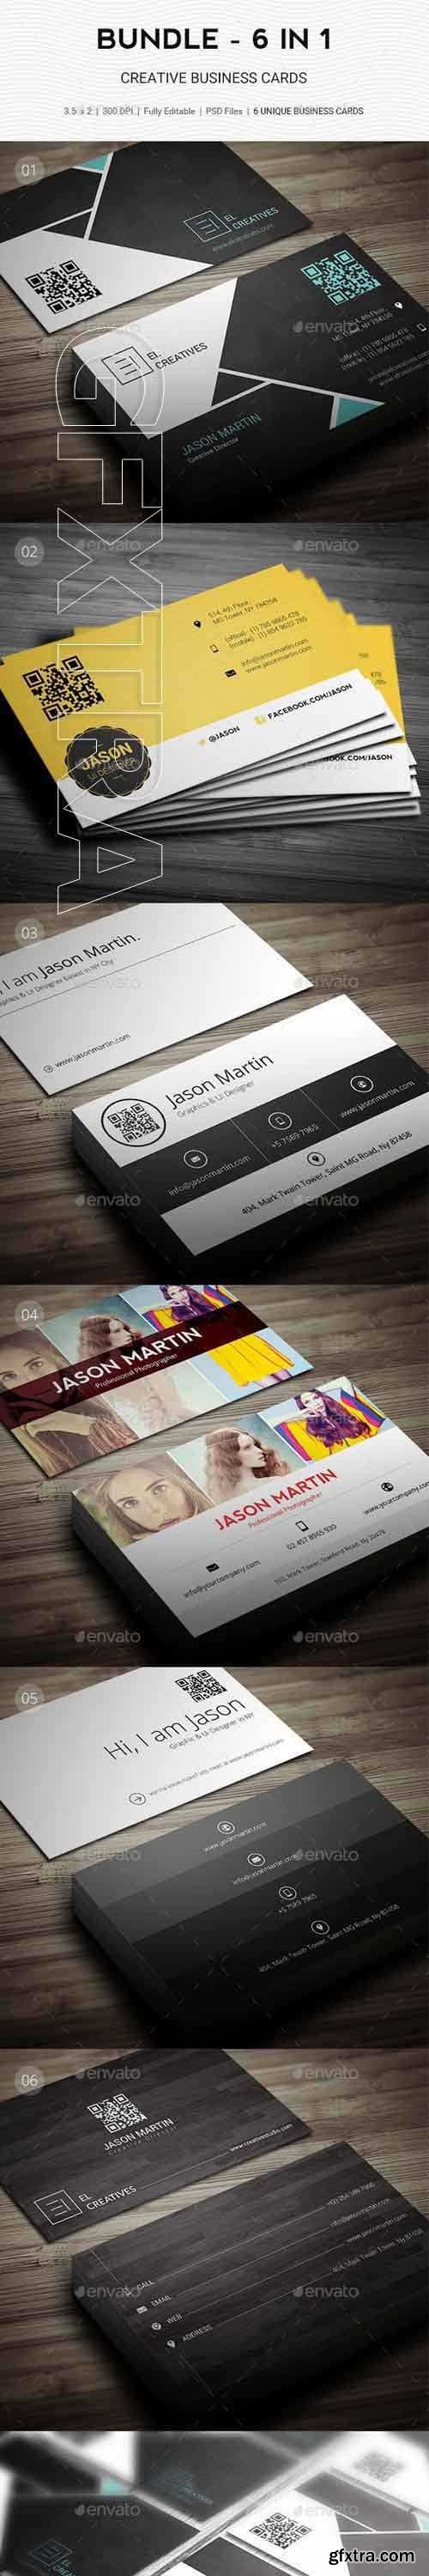 GraphicRiver - Bundle - Pro 6 in 1 - Business Cards - B39 20525050